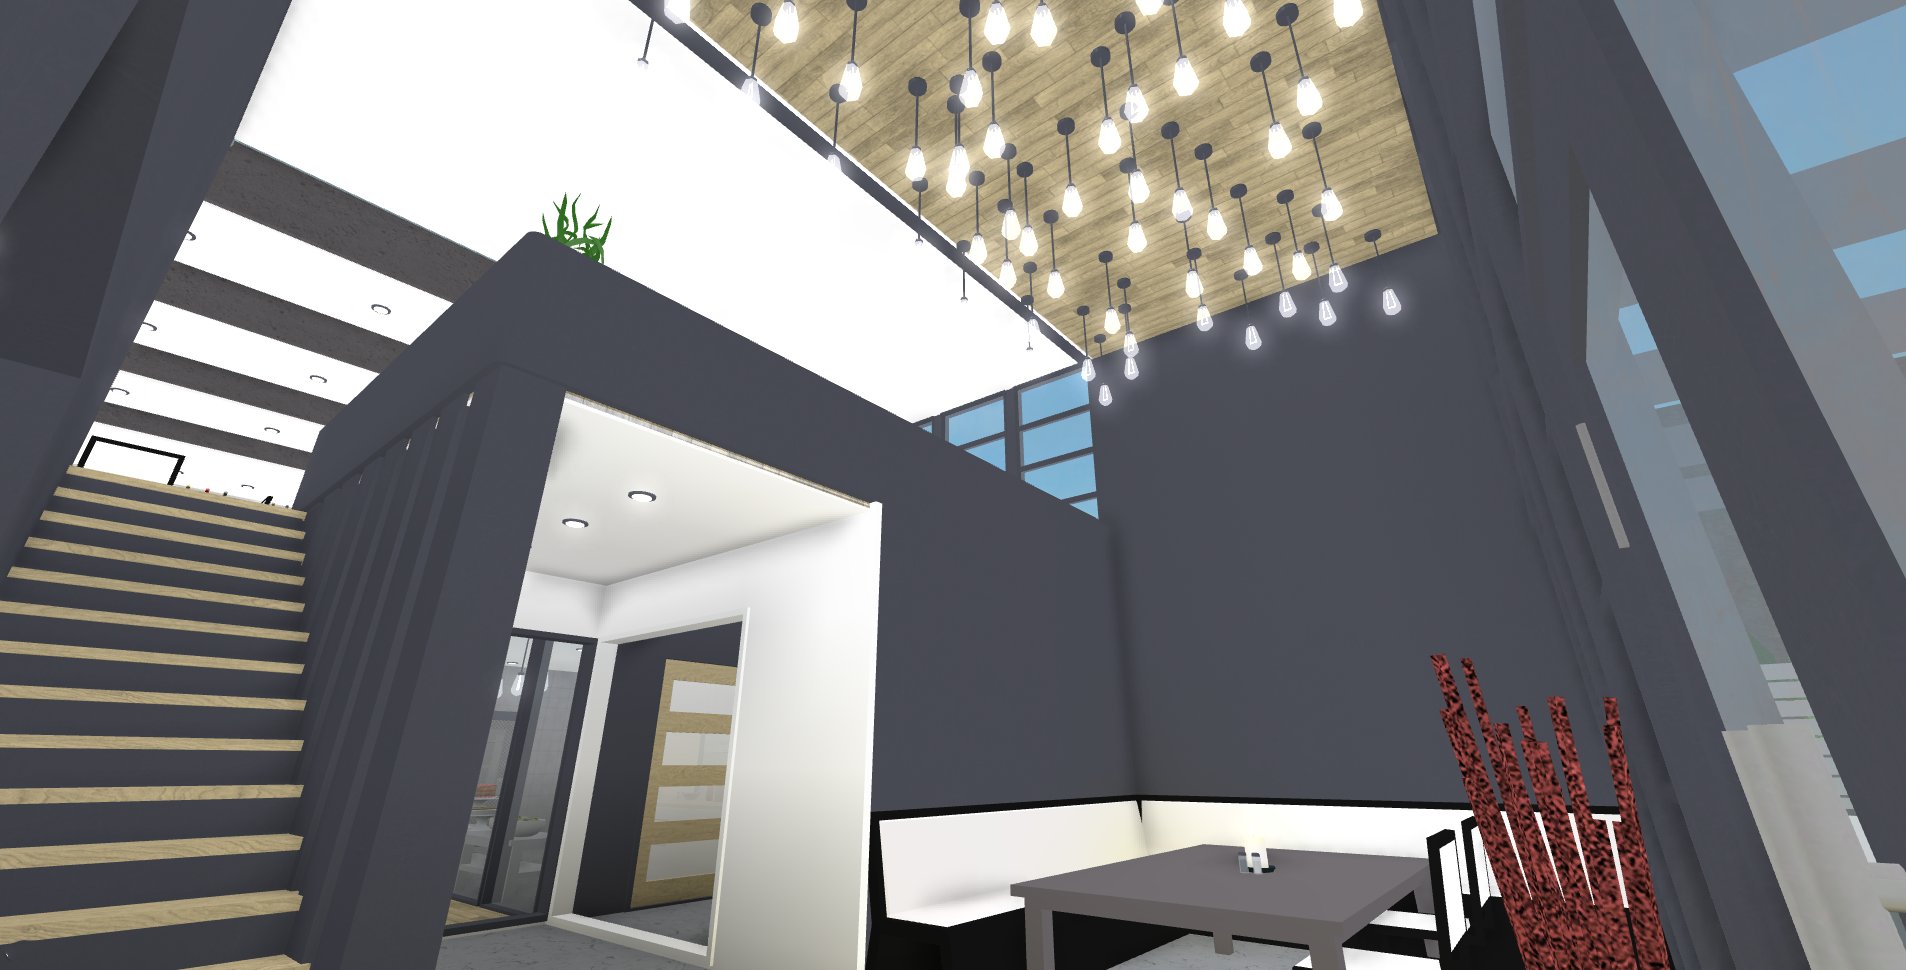 Froggyhopz On Twitter Welcome To Salt Pepper Where You Will Sample Bloxburg S Finest Cuisine Featuring Plenty Of Outdoor Seating Modern Lighting And Sleek Details A View Into The Kitchen As Well - roblox id salt